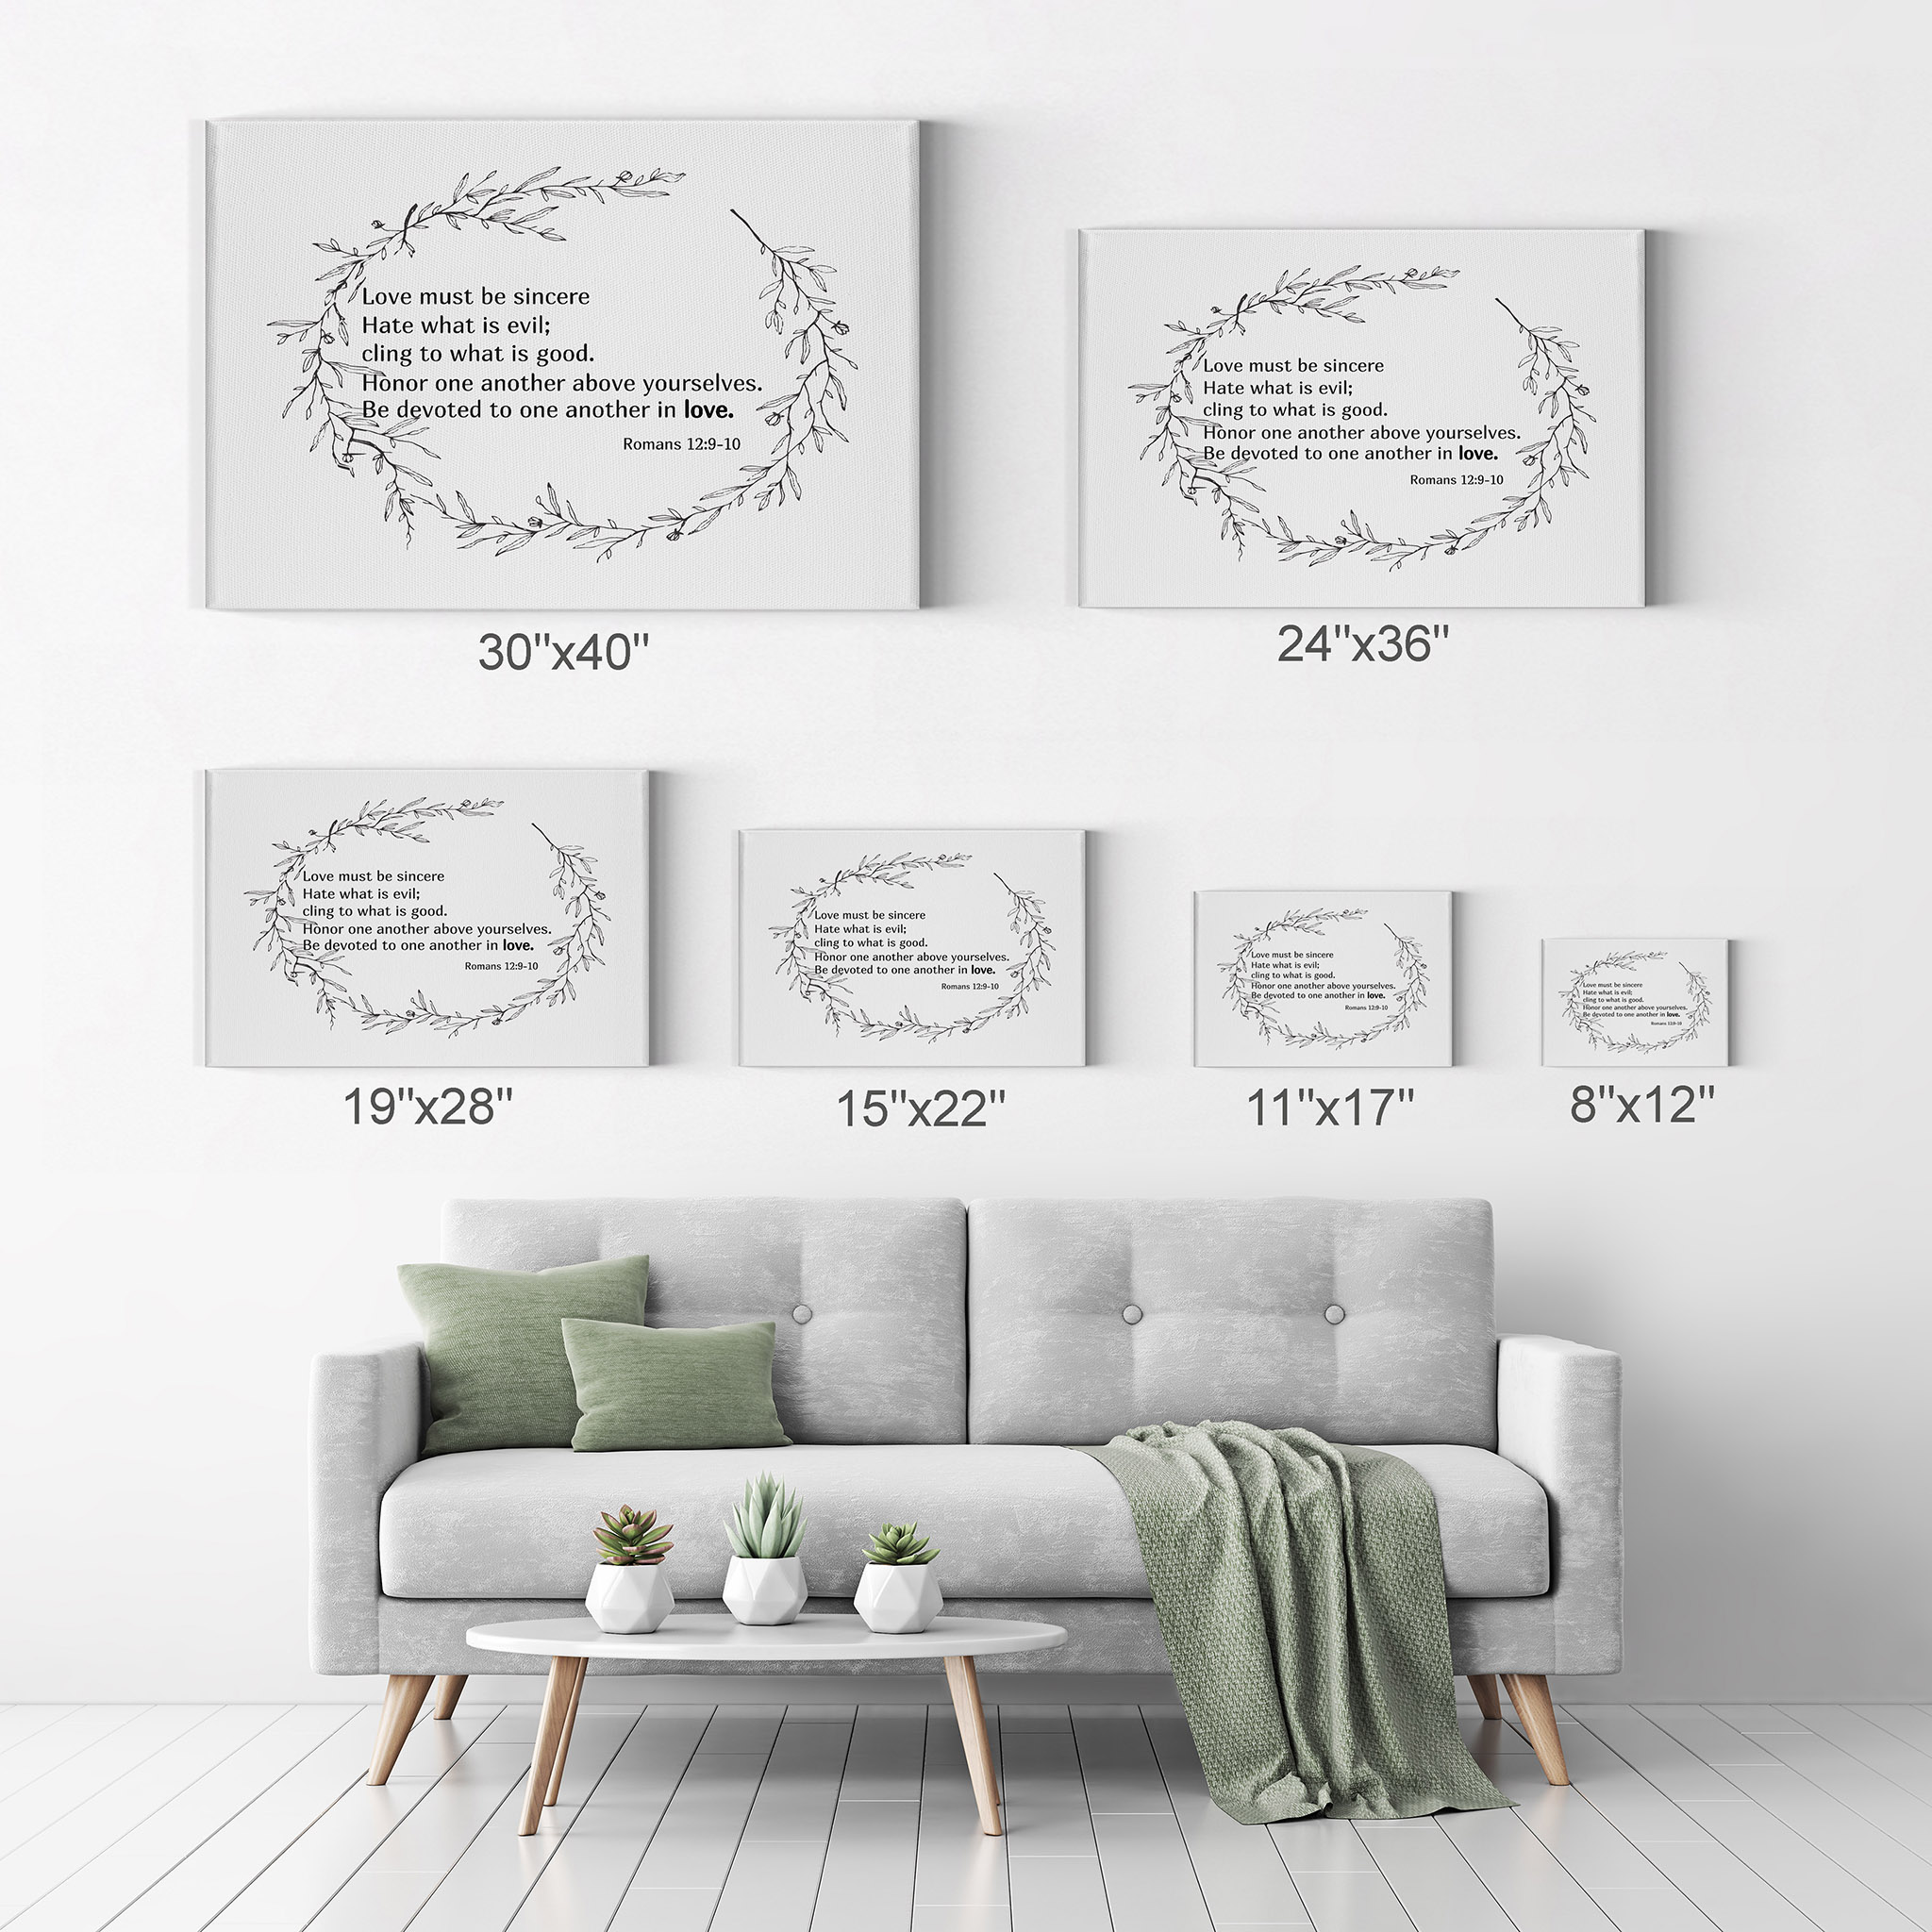 Smile Art Design Romans 12:9-10 Love Must Be Sincere Quote Scripture Wall  Art Bible Verse Canvas Print Rustic Home Decor Ready to Hang Made in the USA-  11x17